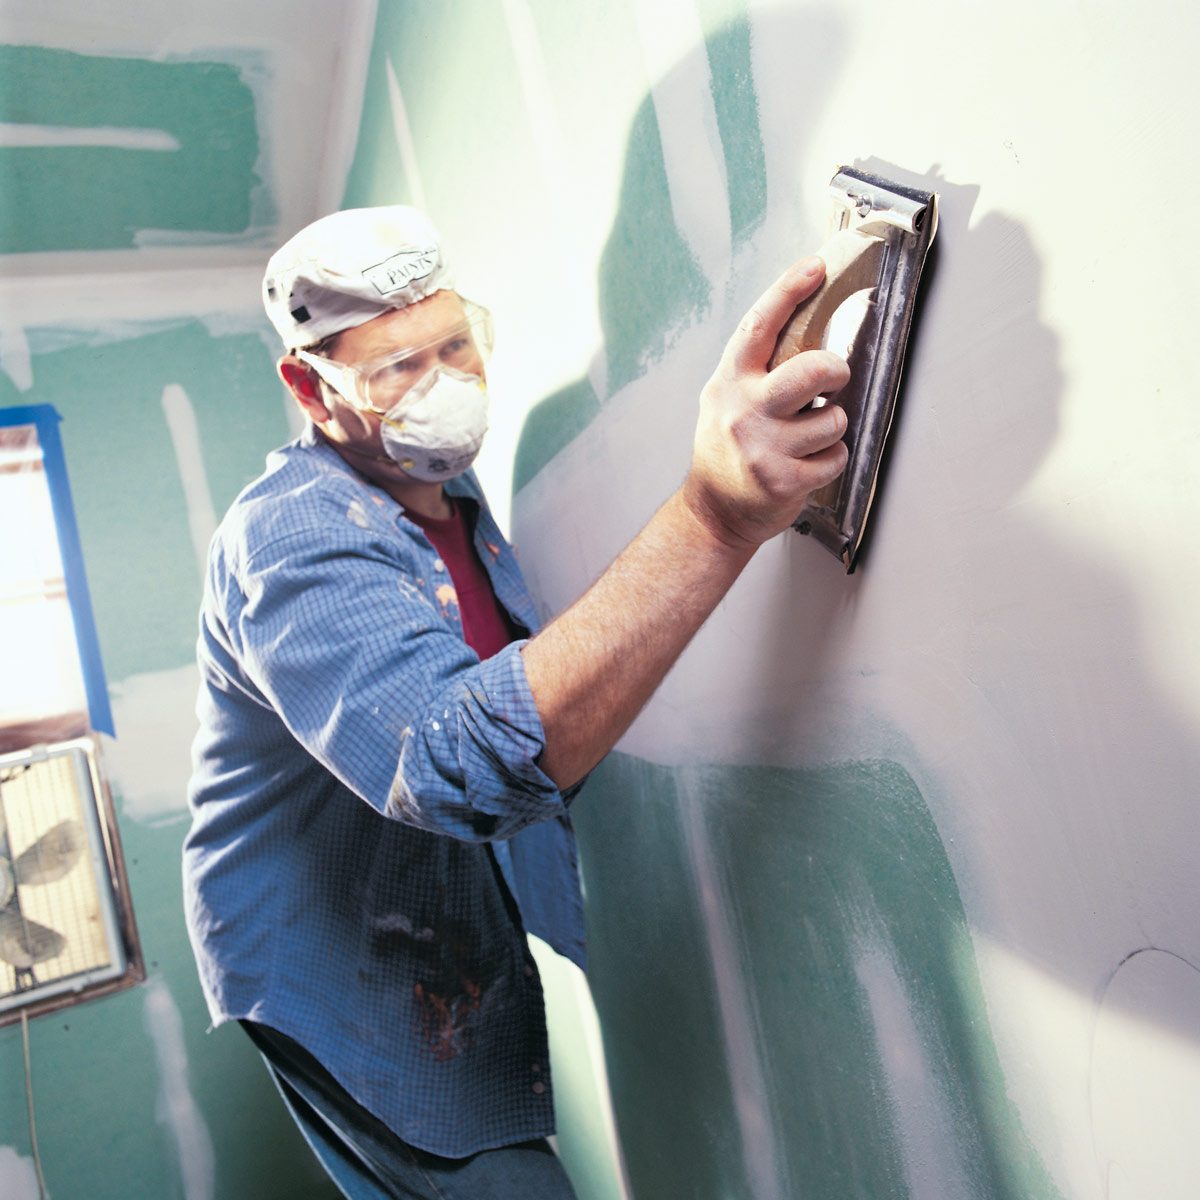 How to Wet-Sand Drywall to Avoid Dust